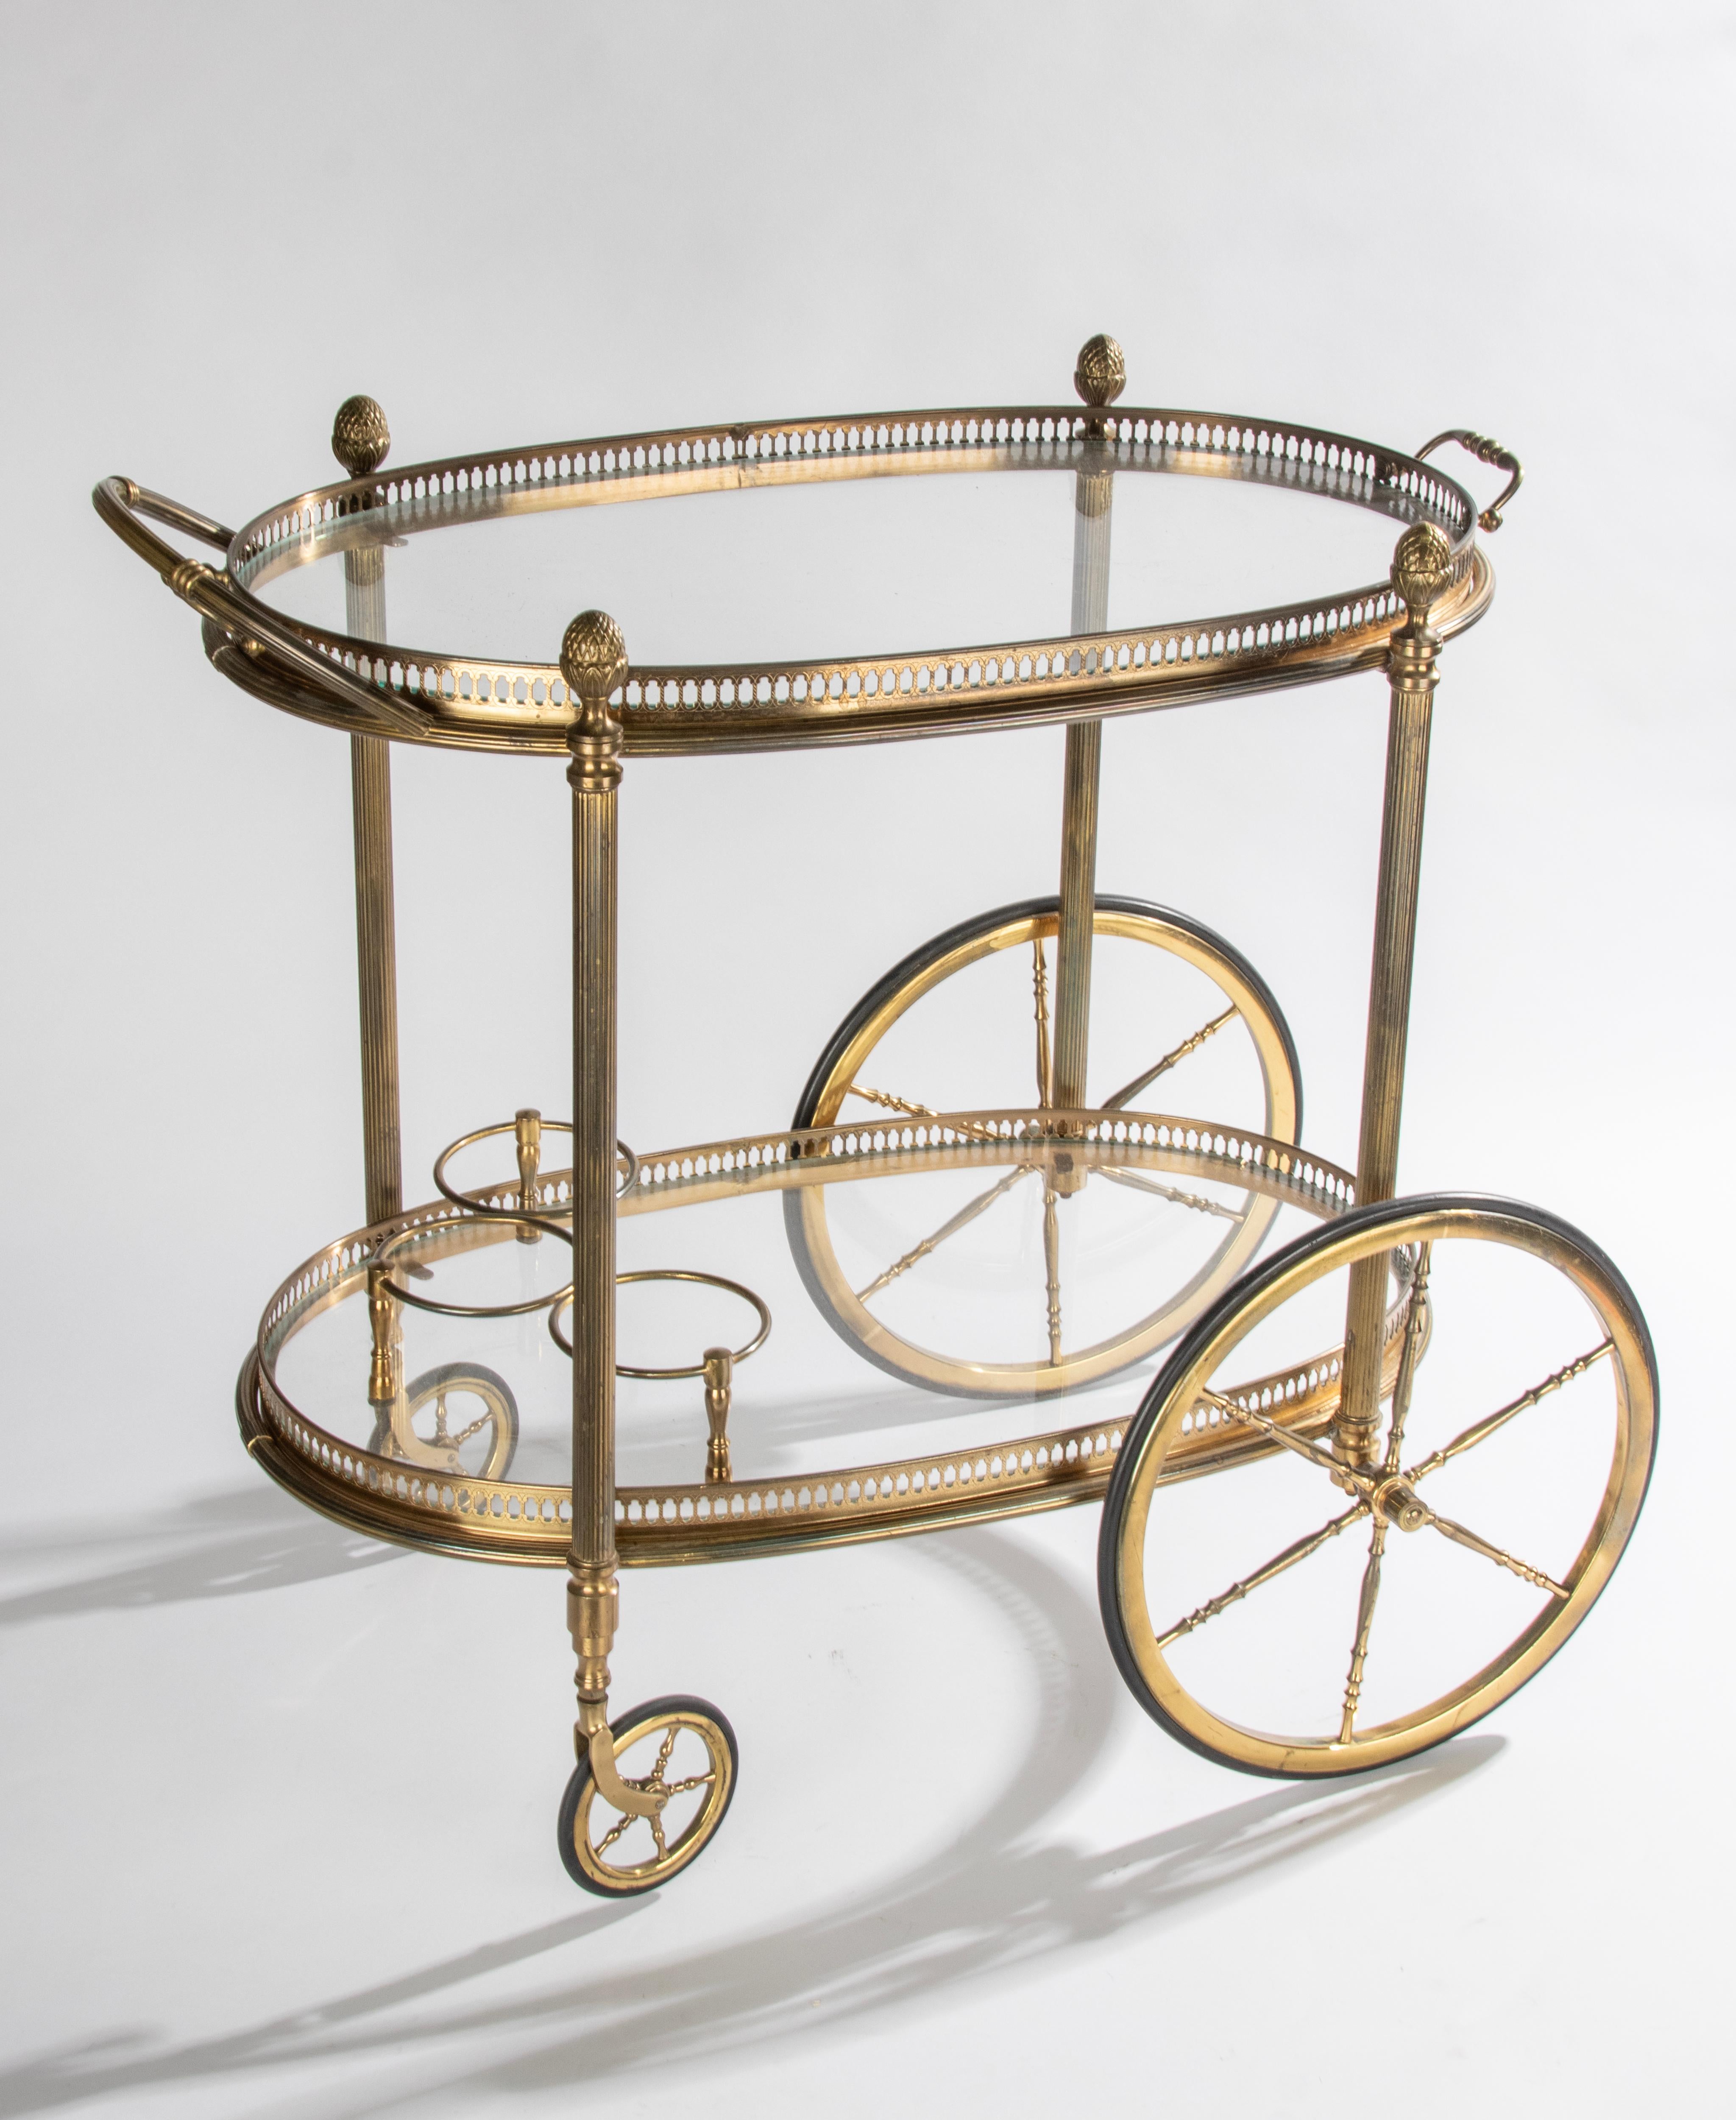 French Mid-Century Modern Two-tier Bar Cart / Server Trolley - Maison Baguès Style For Sale